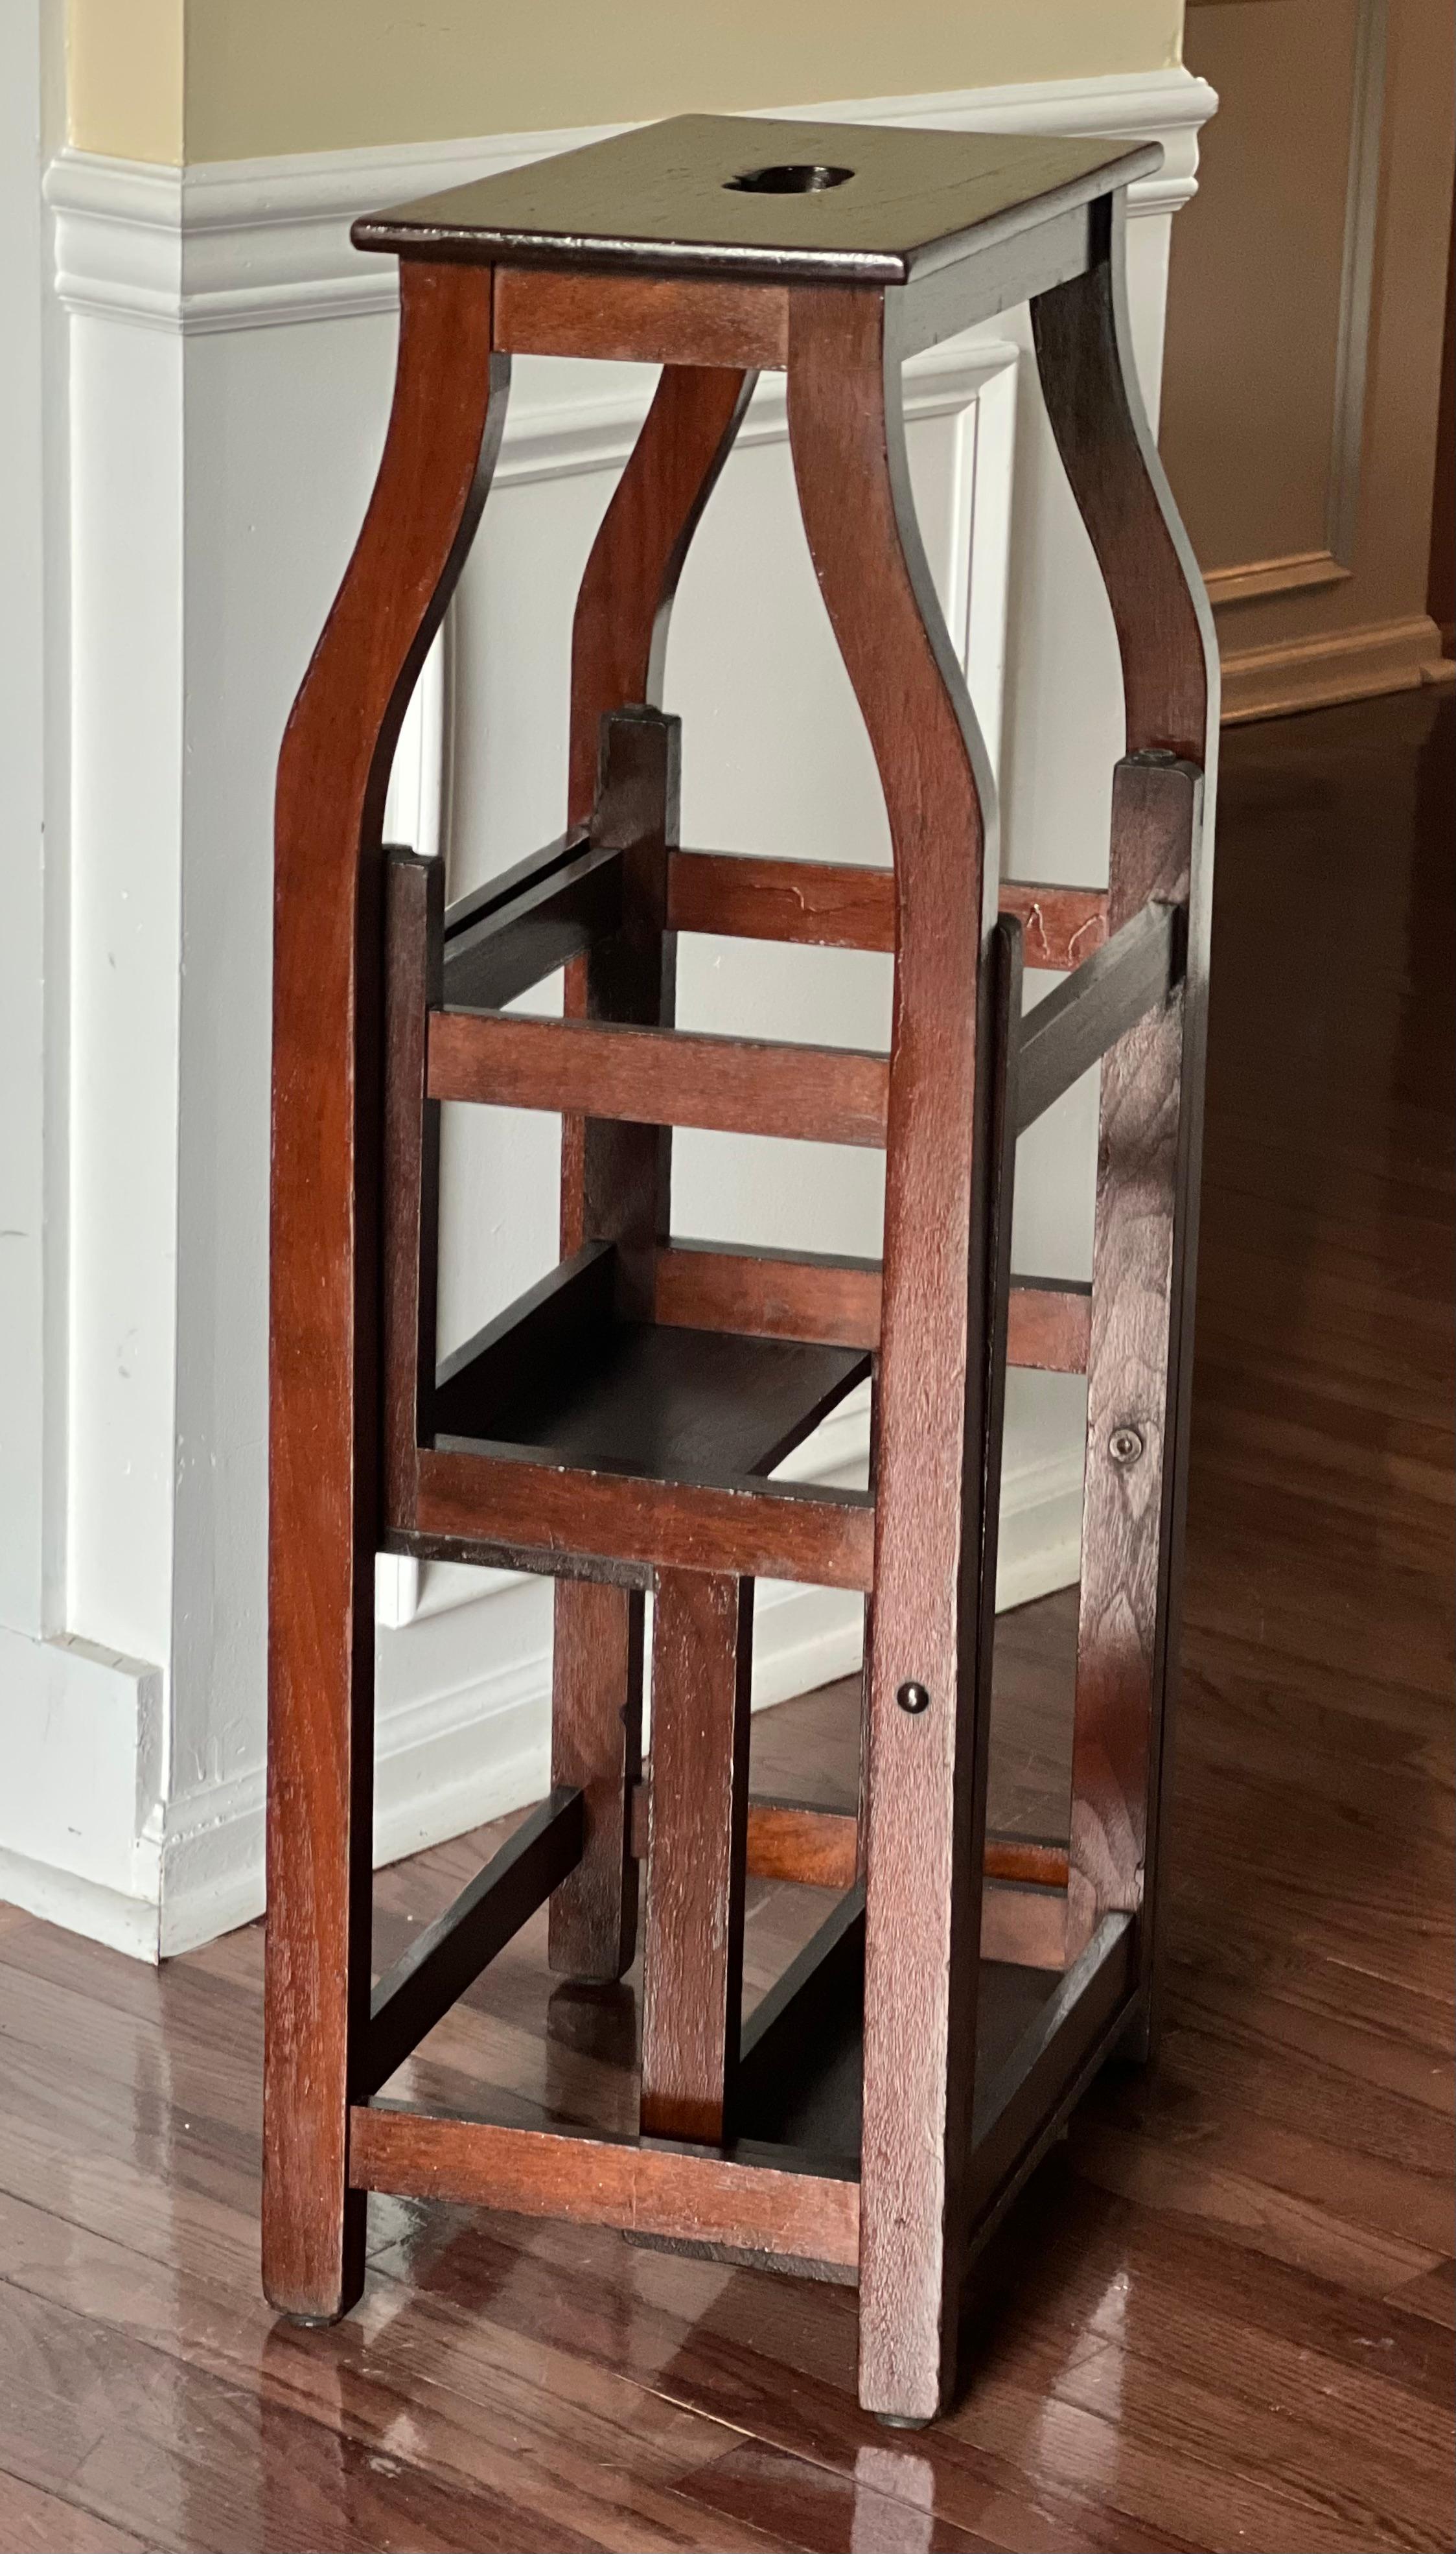 19th century French oak metamorphic library ladder or step stool, France, c. 1890's.

This versatile ladder easily folds into the frame with a single, smooth pivot motion.  It features a sturdy, slender oak frame with mahogany steps and a pierced